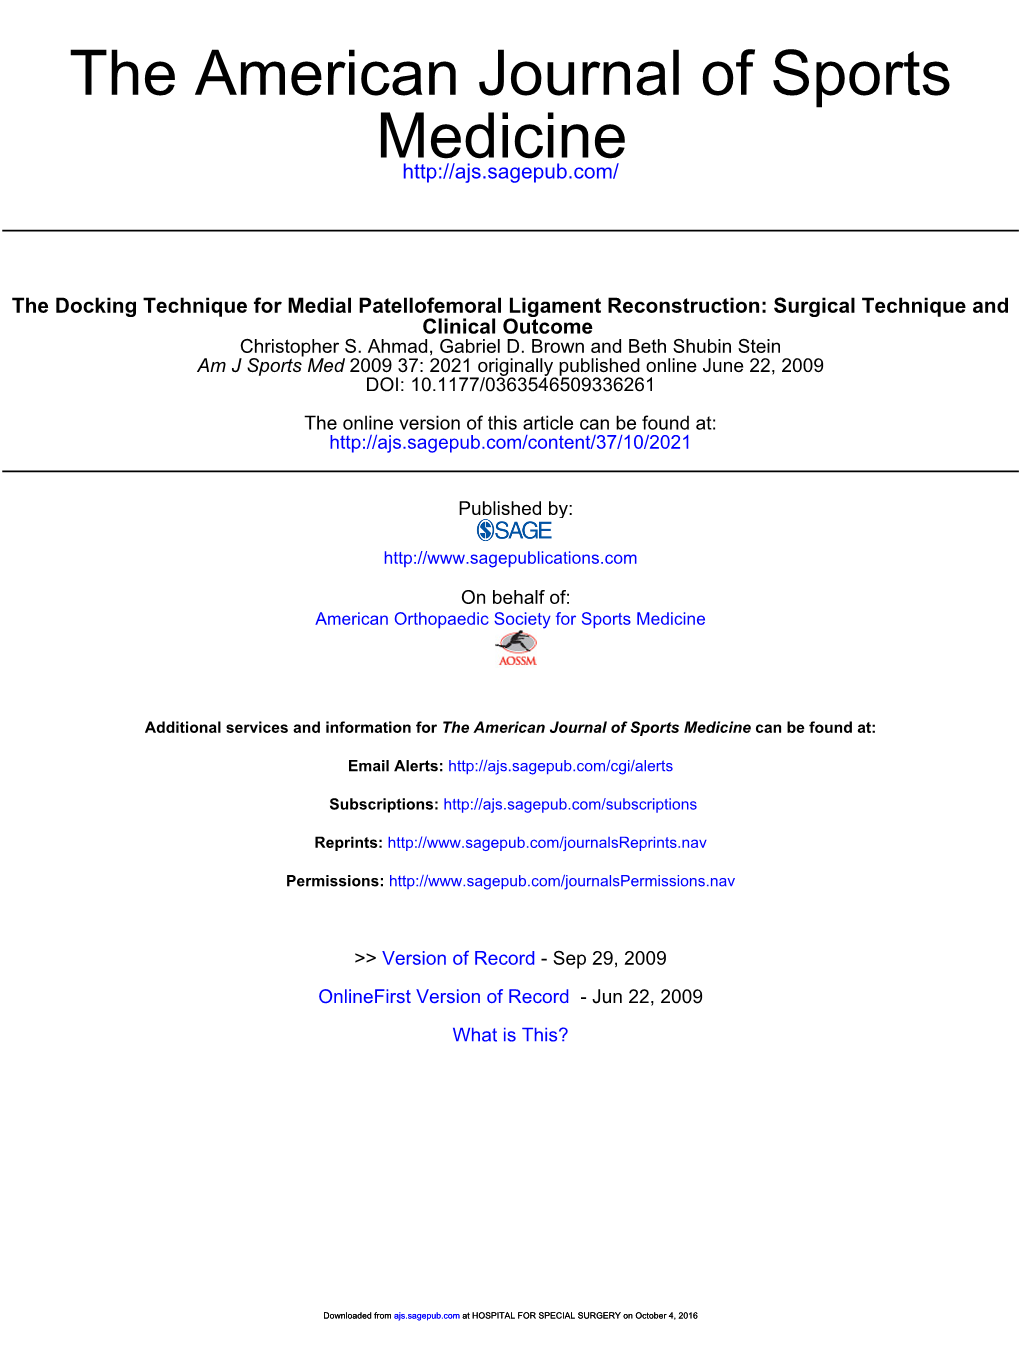 The Docking Technique for Medial Patellofemoral Ligament Reconstruction: Surgical Technique and Clinical Outcome Christopher S